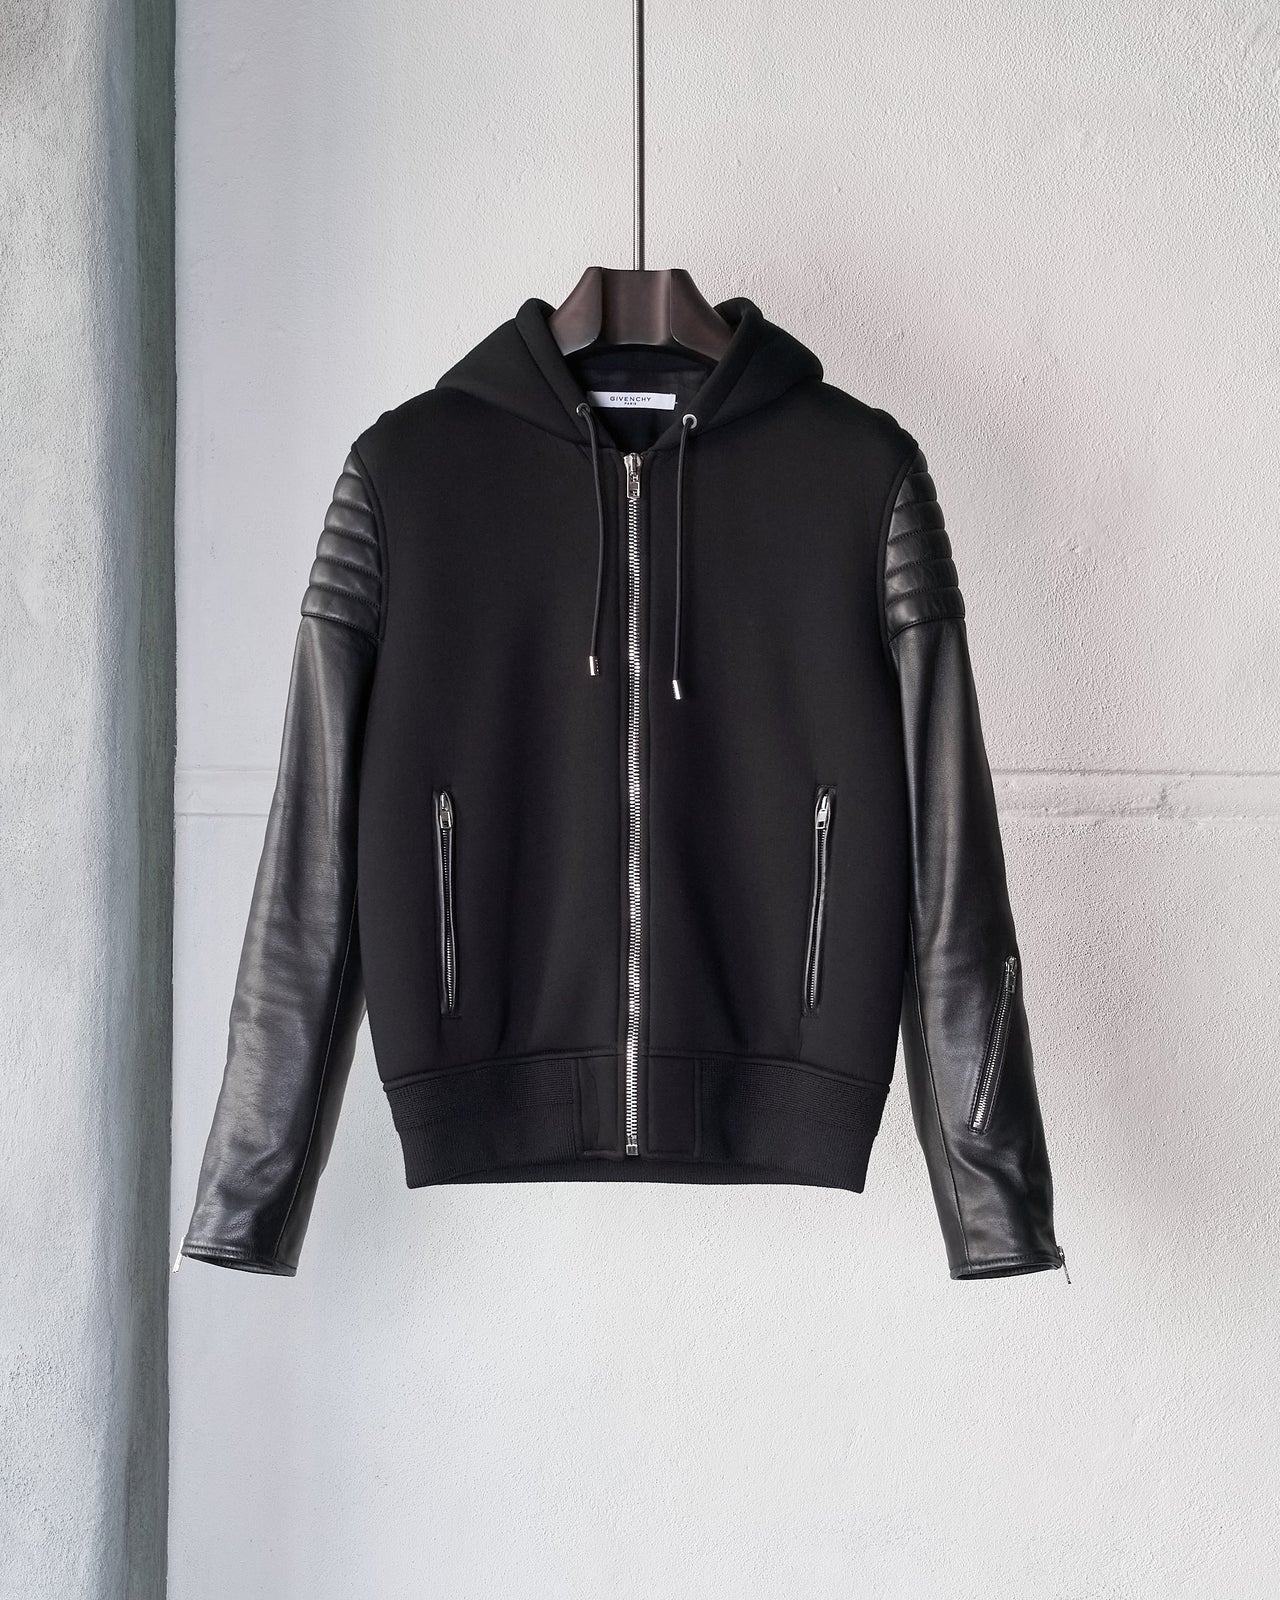 Givenchy Neoprene and leather bomber jacket with hood